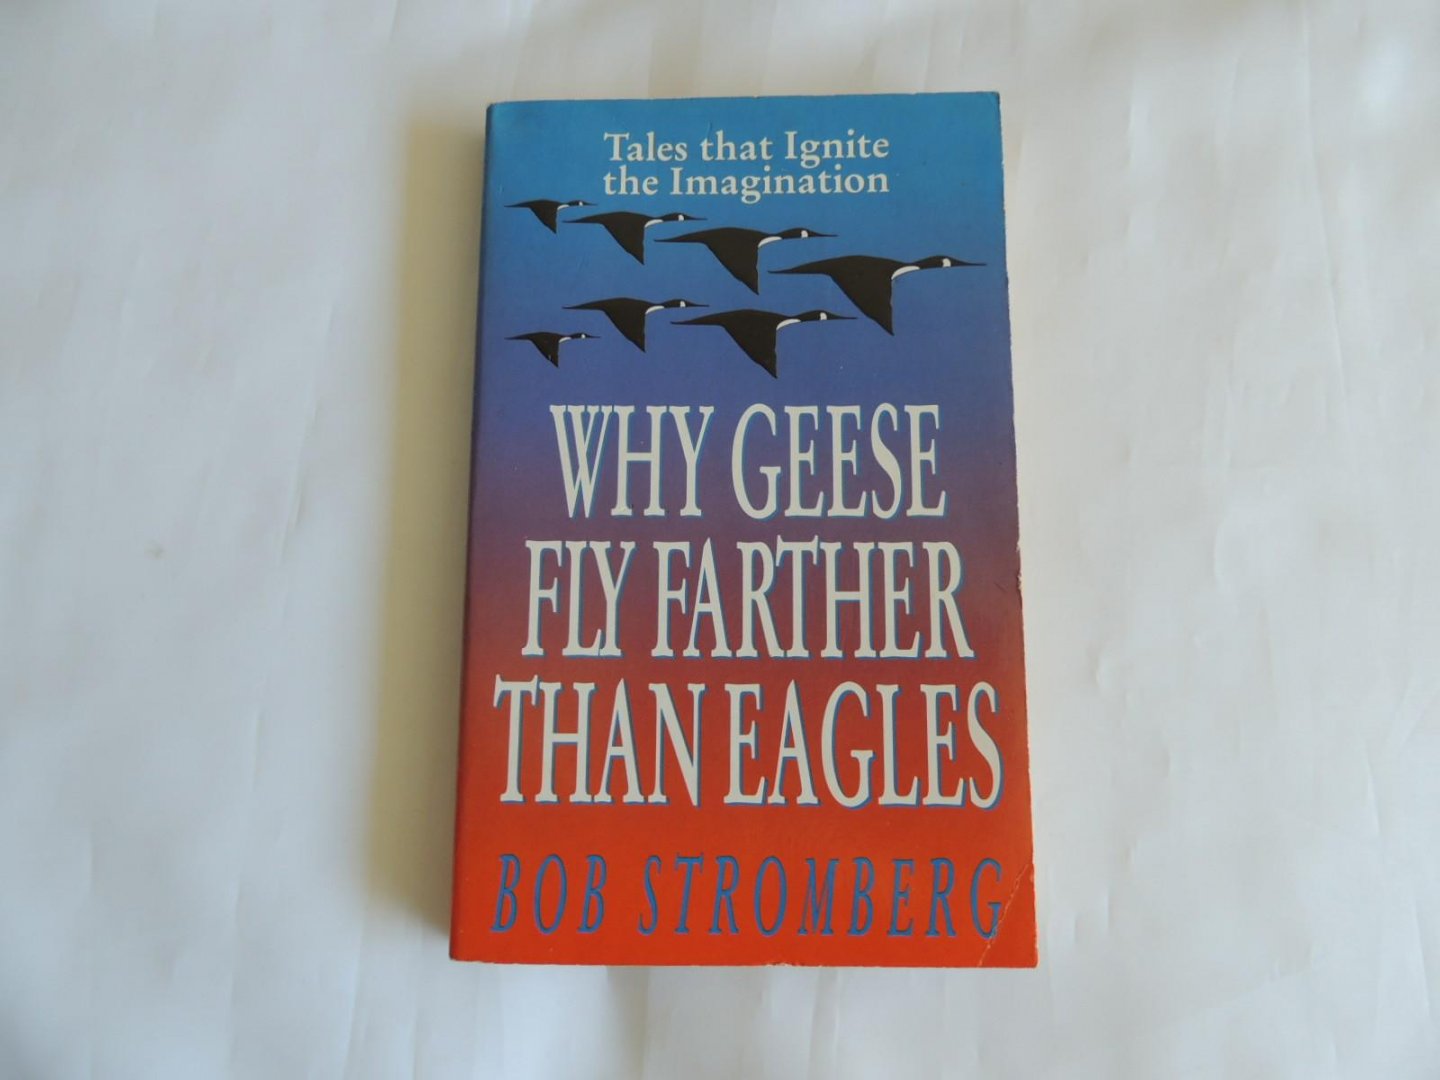 Bob Stromberg - Why geese fly farther than eagles